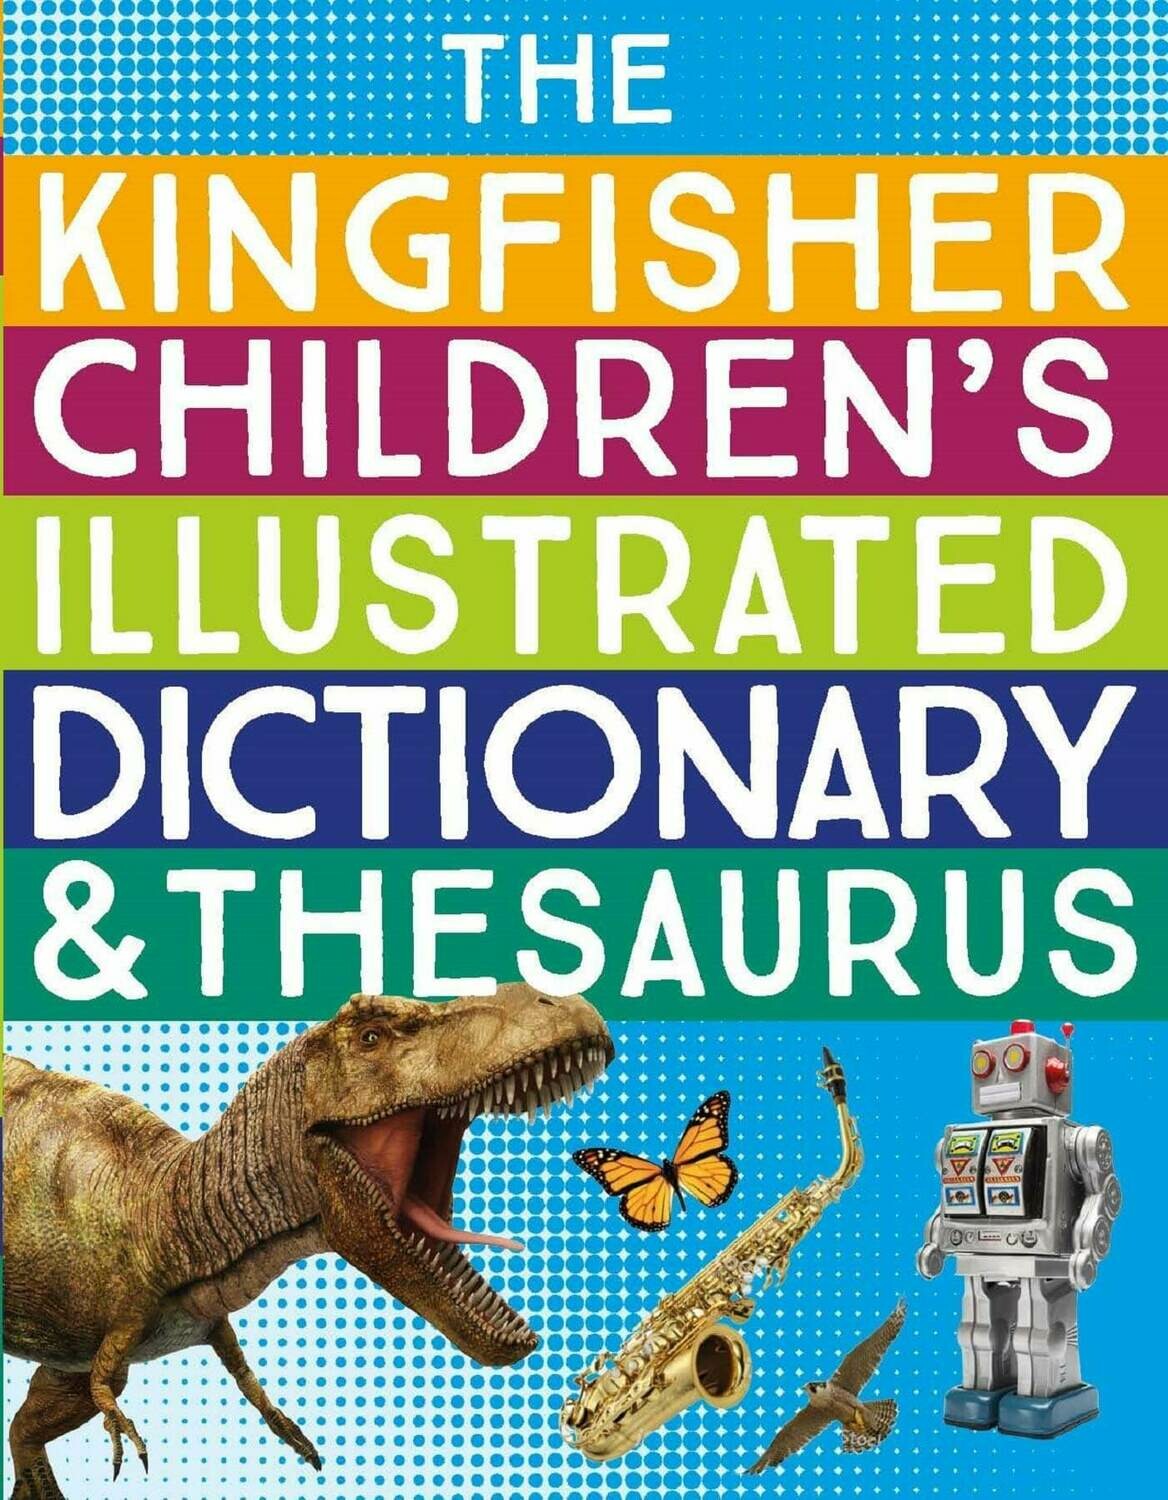 The Kingfisher Children's Illustrated Dictionary and Thesaurus